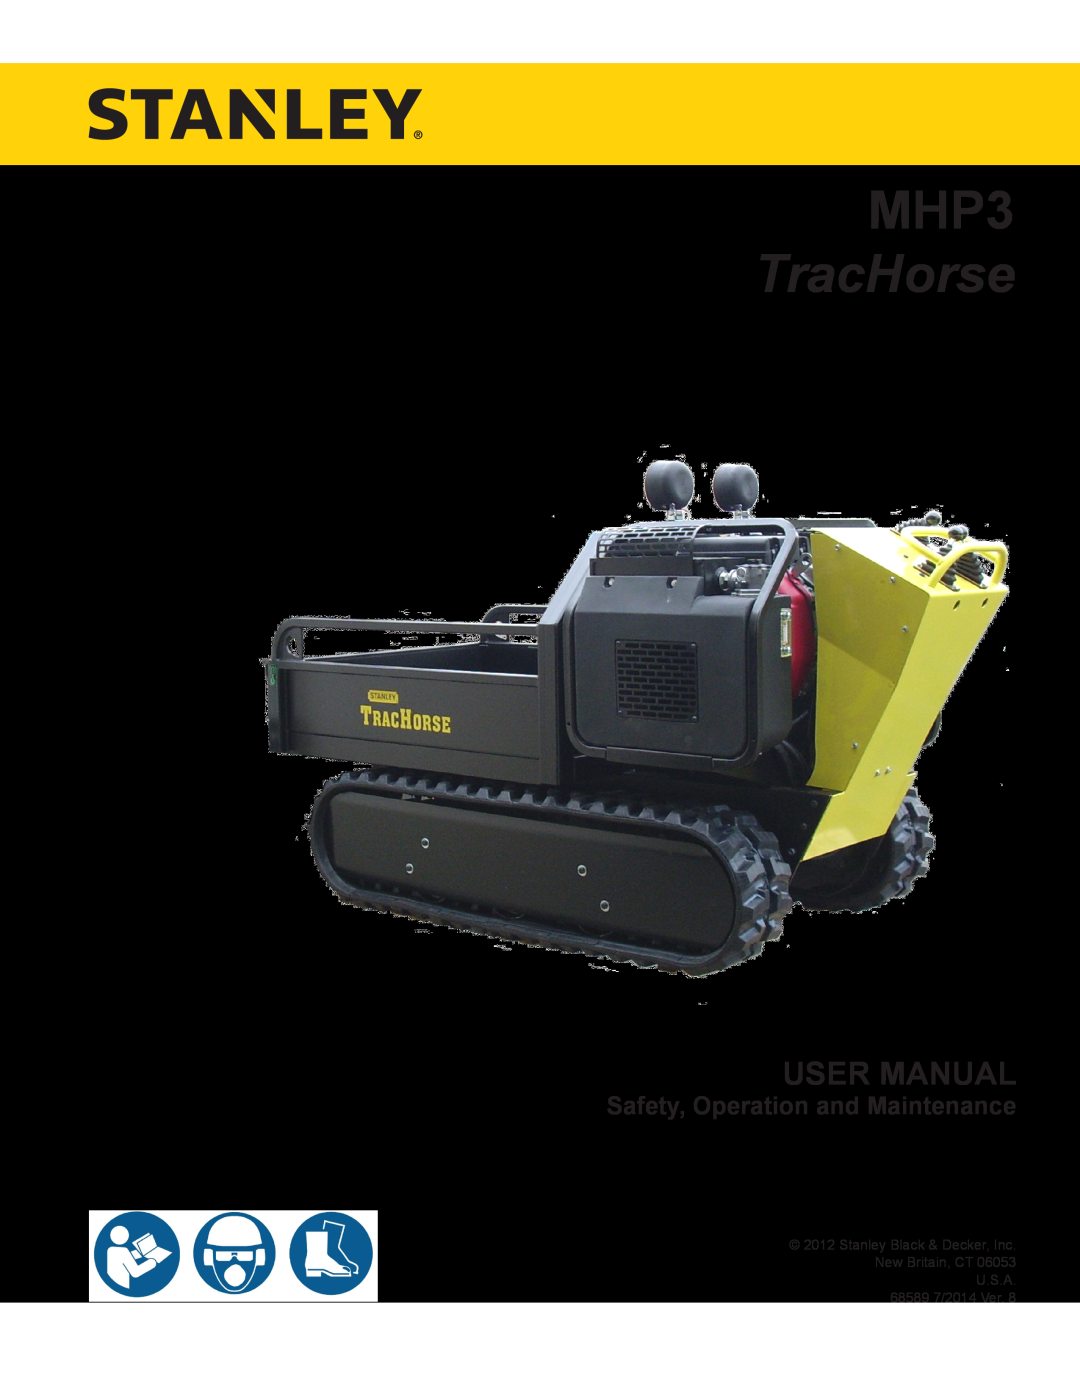 Stanley Black & Decker manual Safety, Operation and Maintenance, MHP3 DIESEL TRACHORSE 